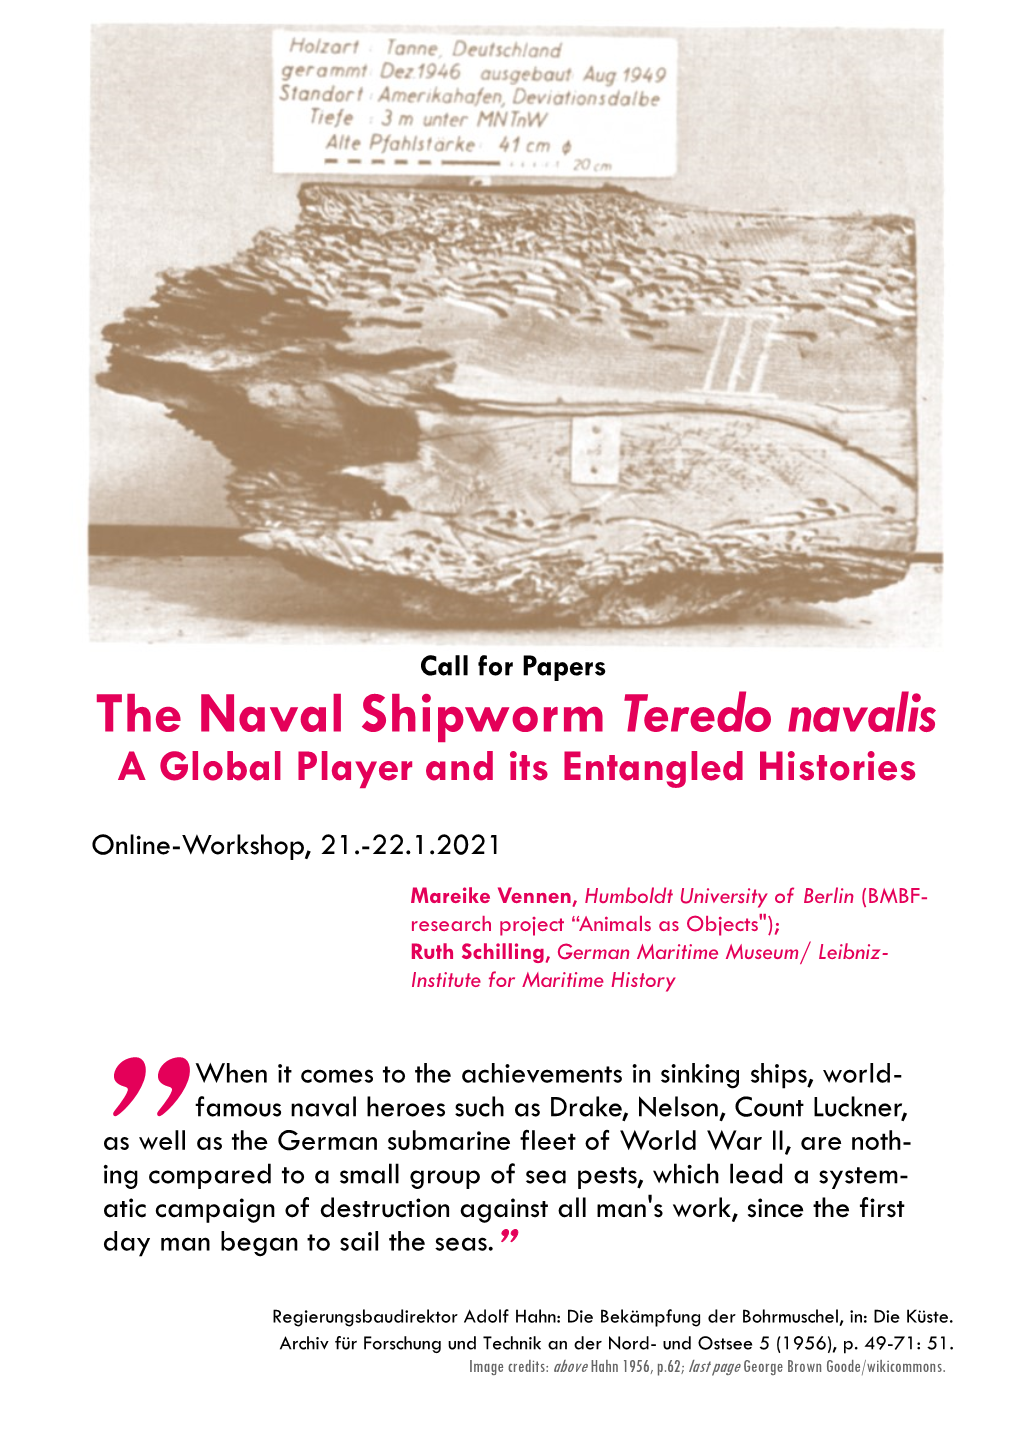 The Naval Shipworm Teredo Navalis a Global Player and Its Entangled Histories